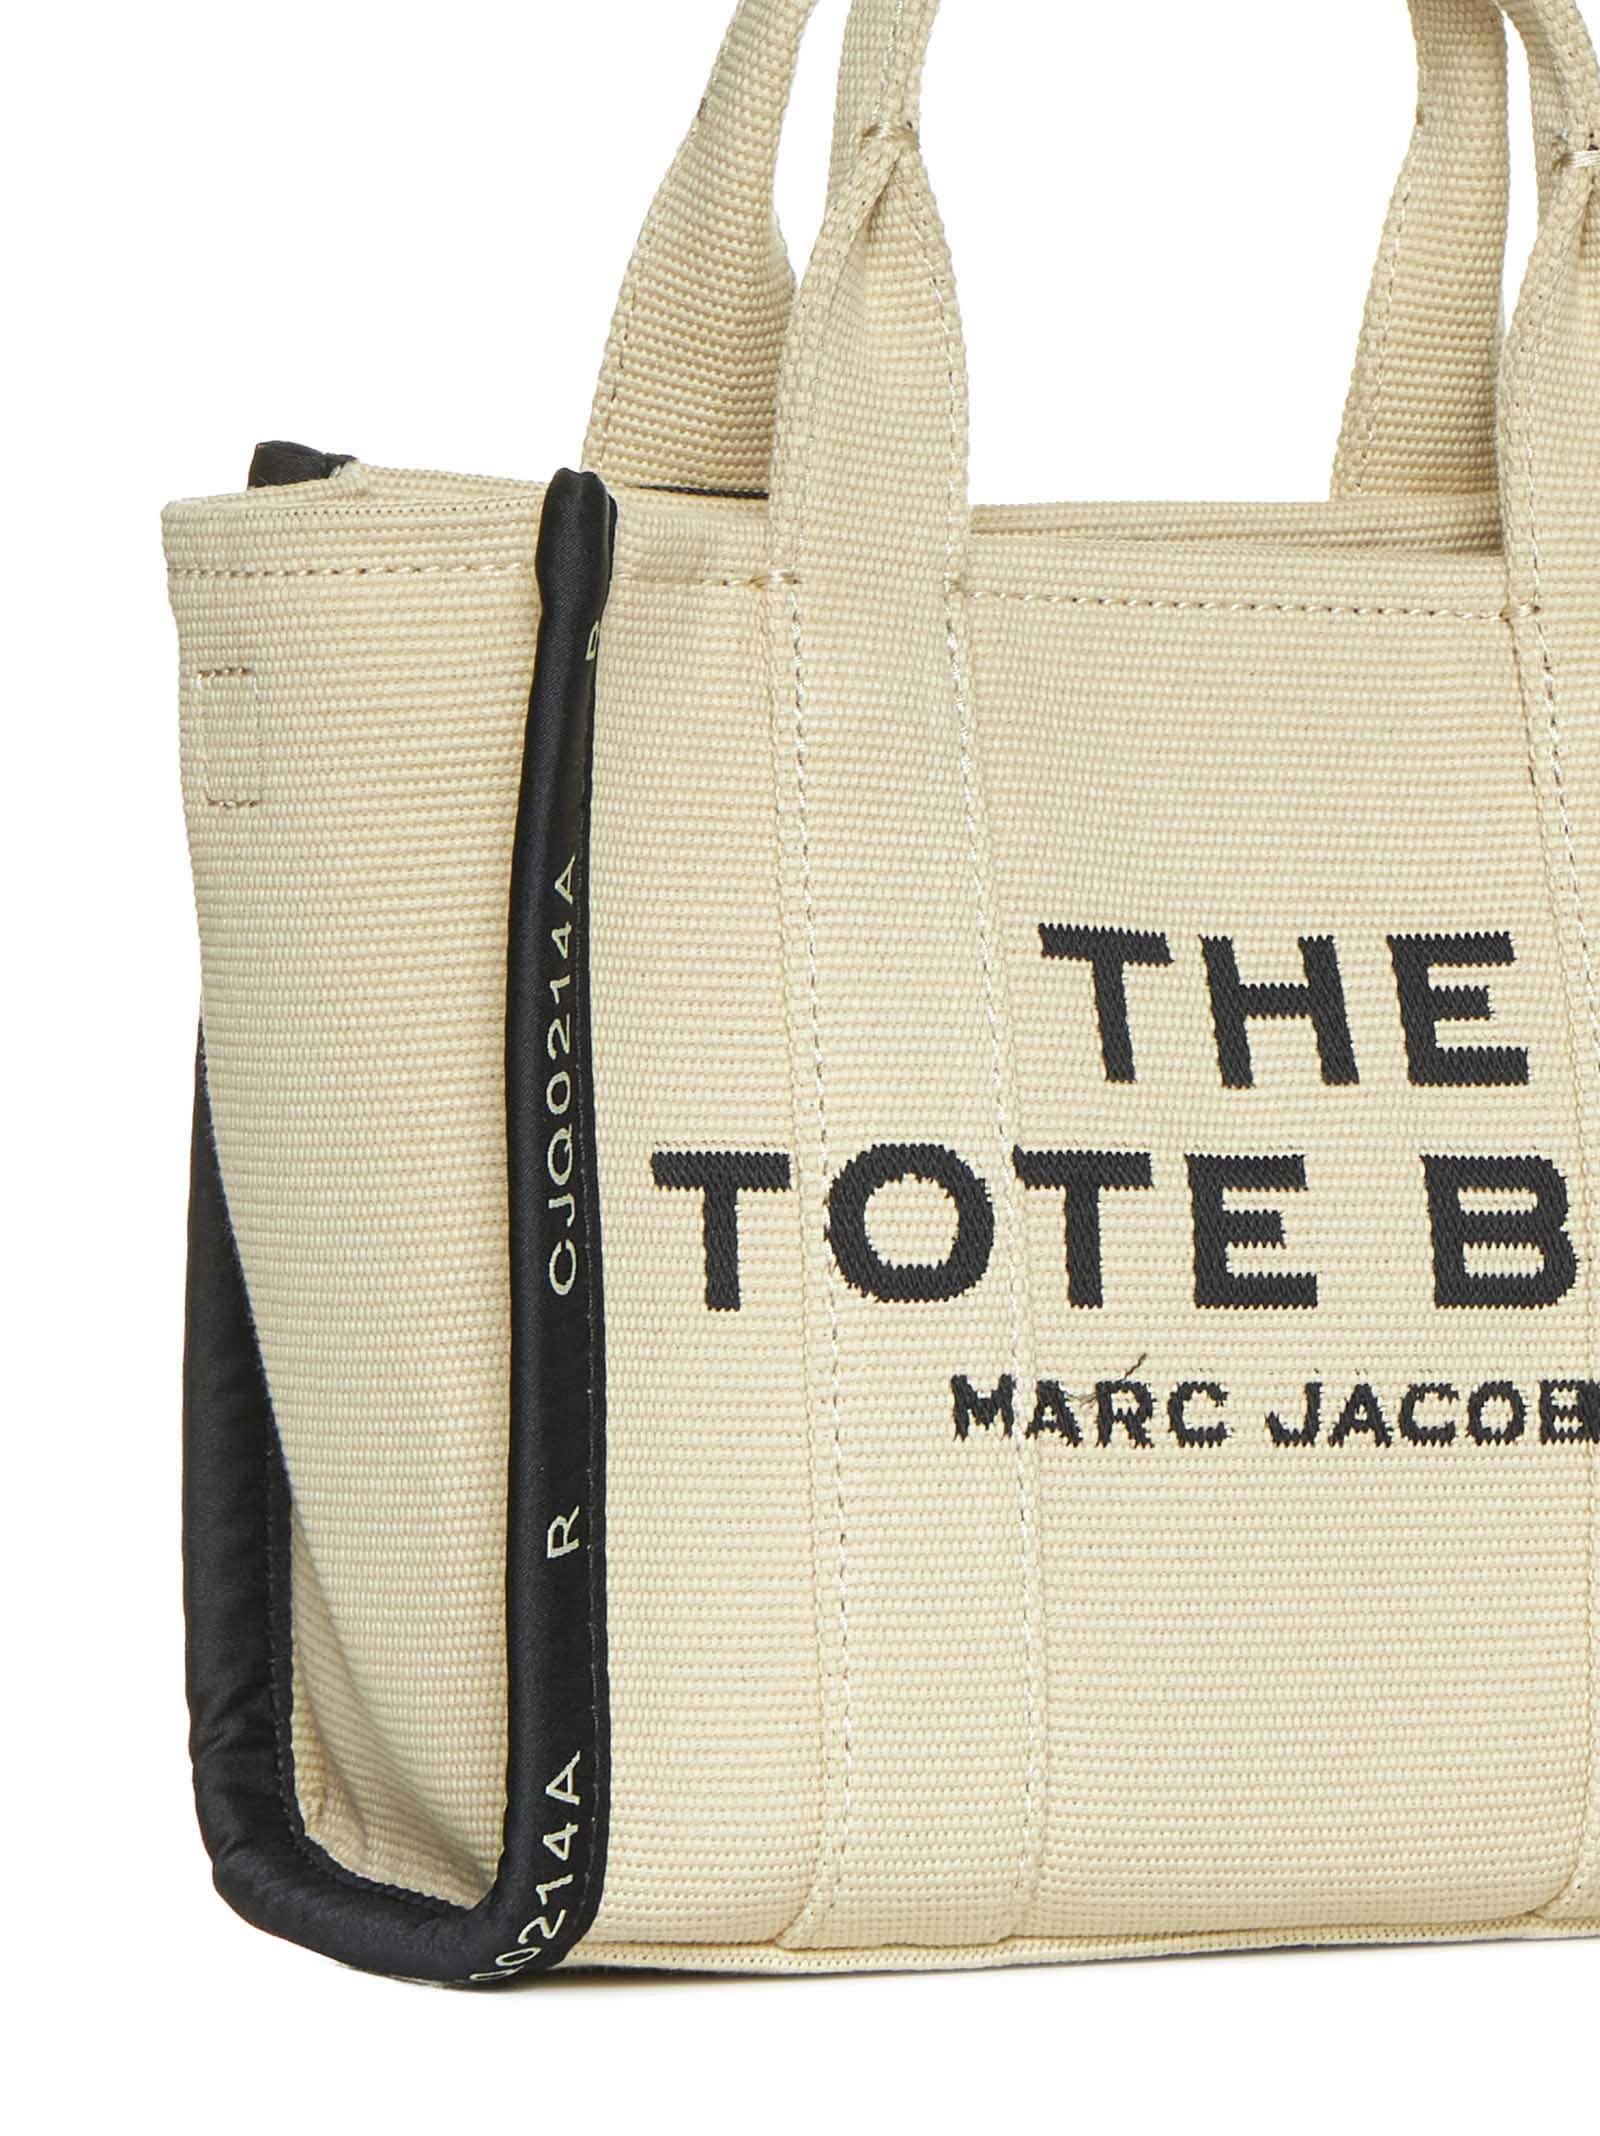 Shop Marc Jacobs Tote In Warm Sand